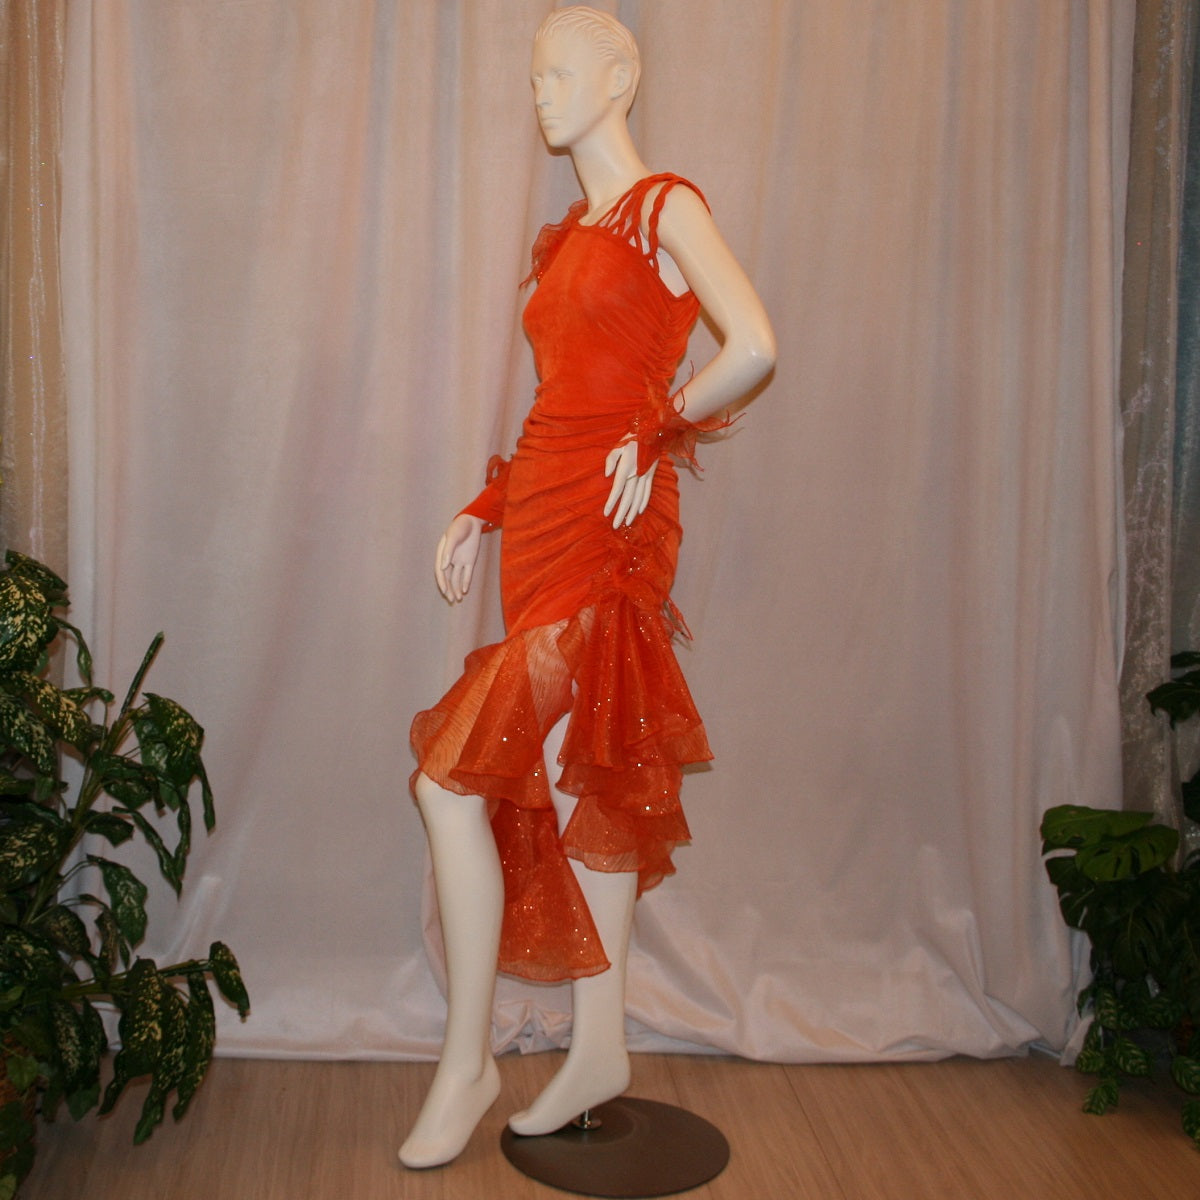 Crystal's Creations left side view of Orange Latin/rhythm dress was created in luxurious orange solid slinky with oodles of glitter organza flounces & accents, embellished with a touch of Swarovski hand beading.